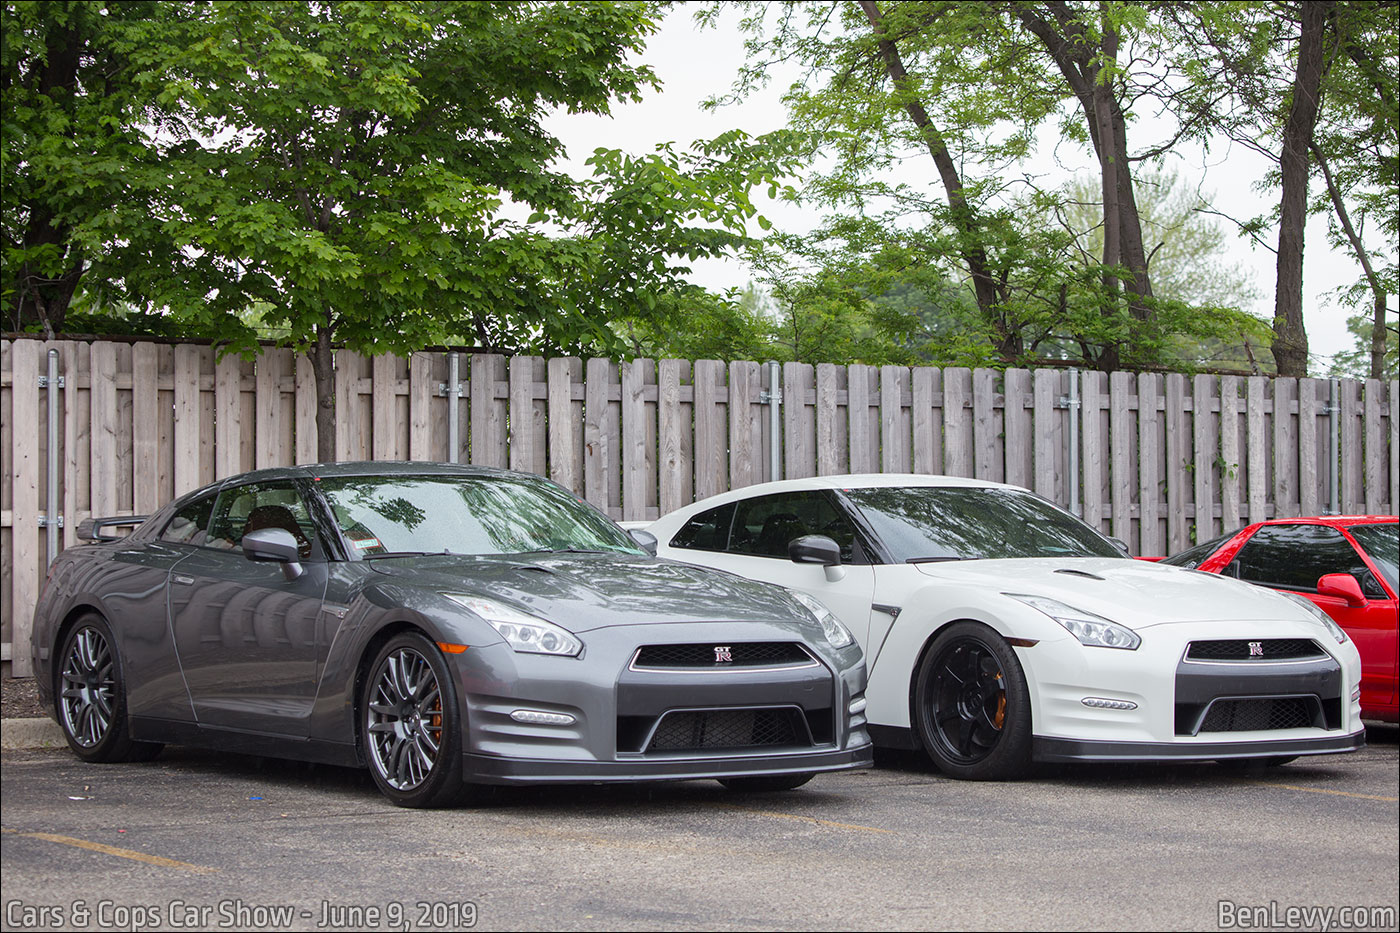 A pair of R35 Nissan GT-Rs